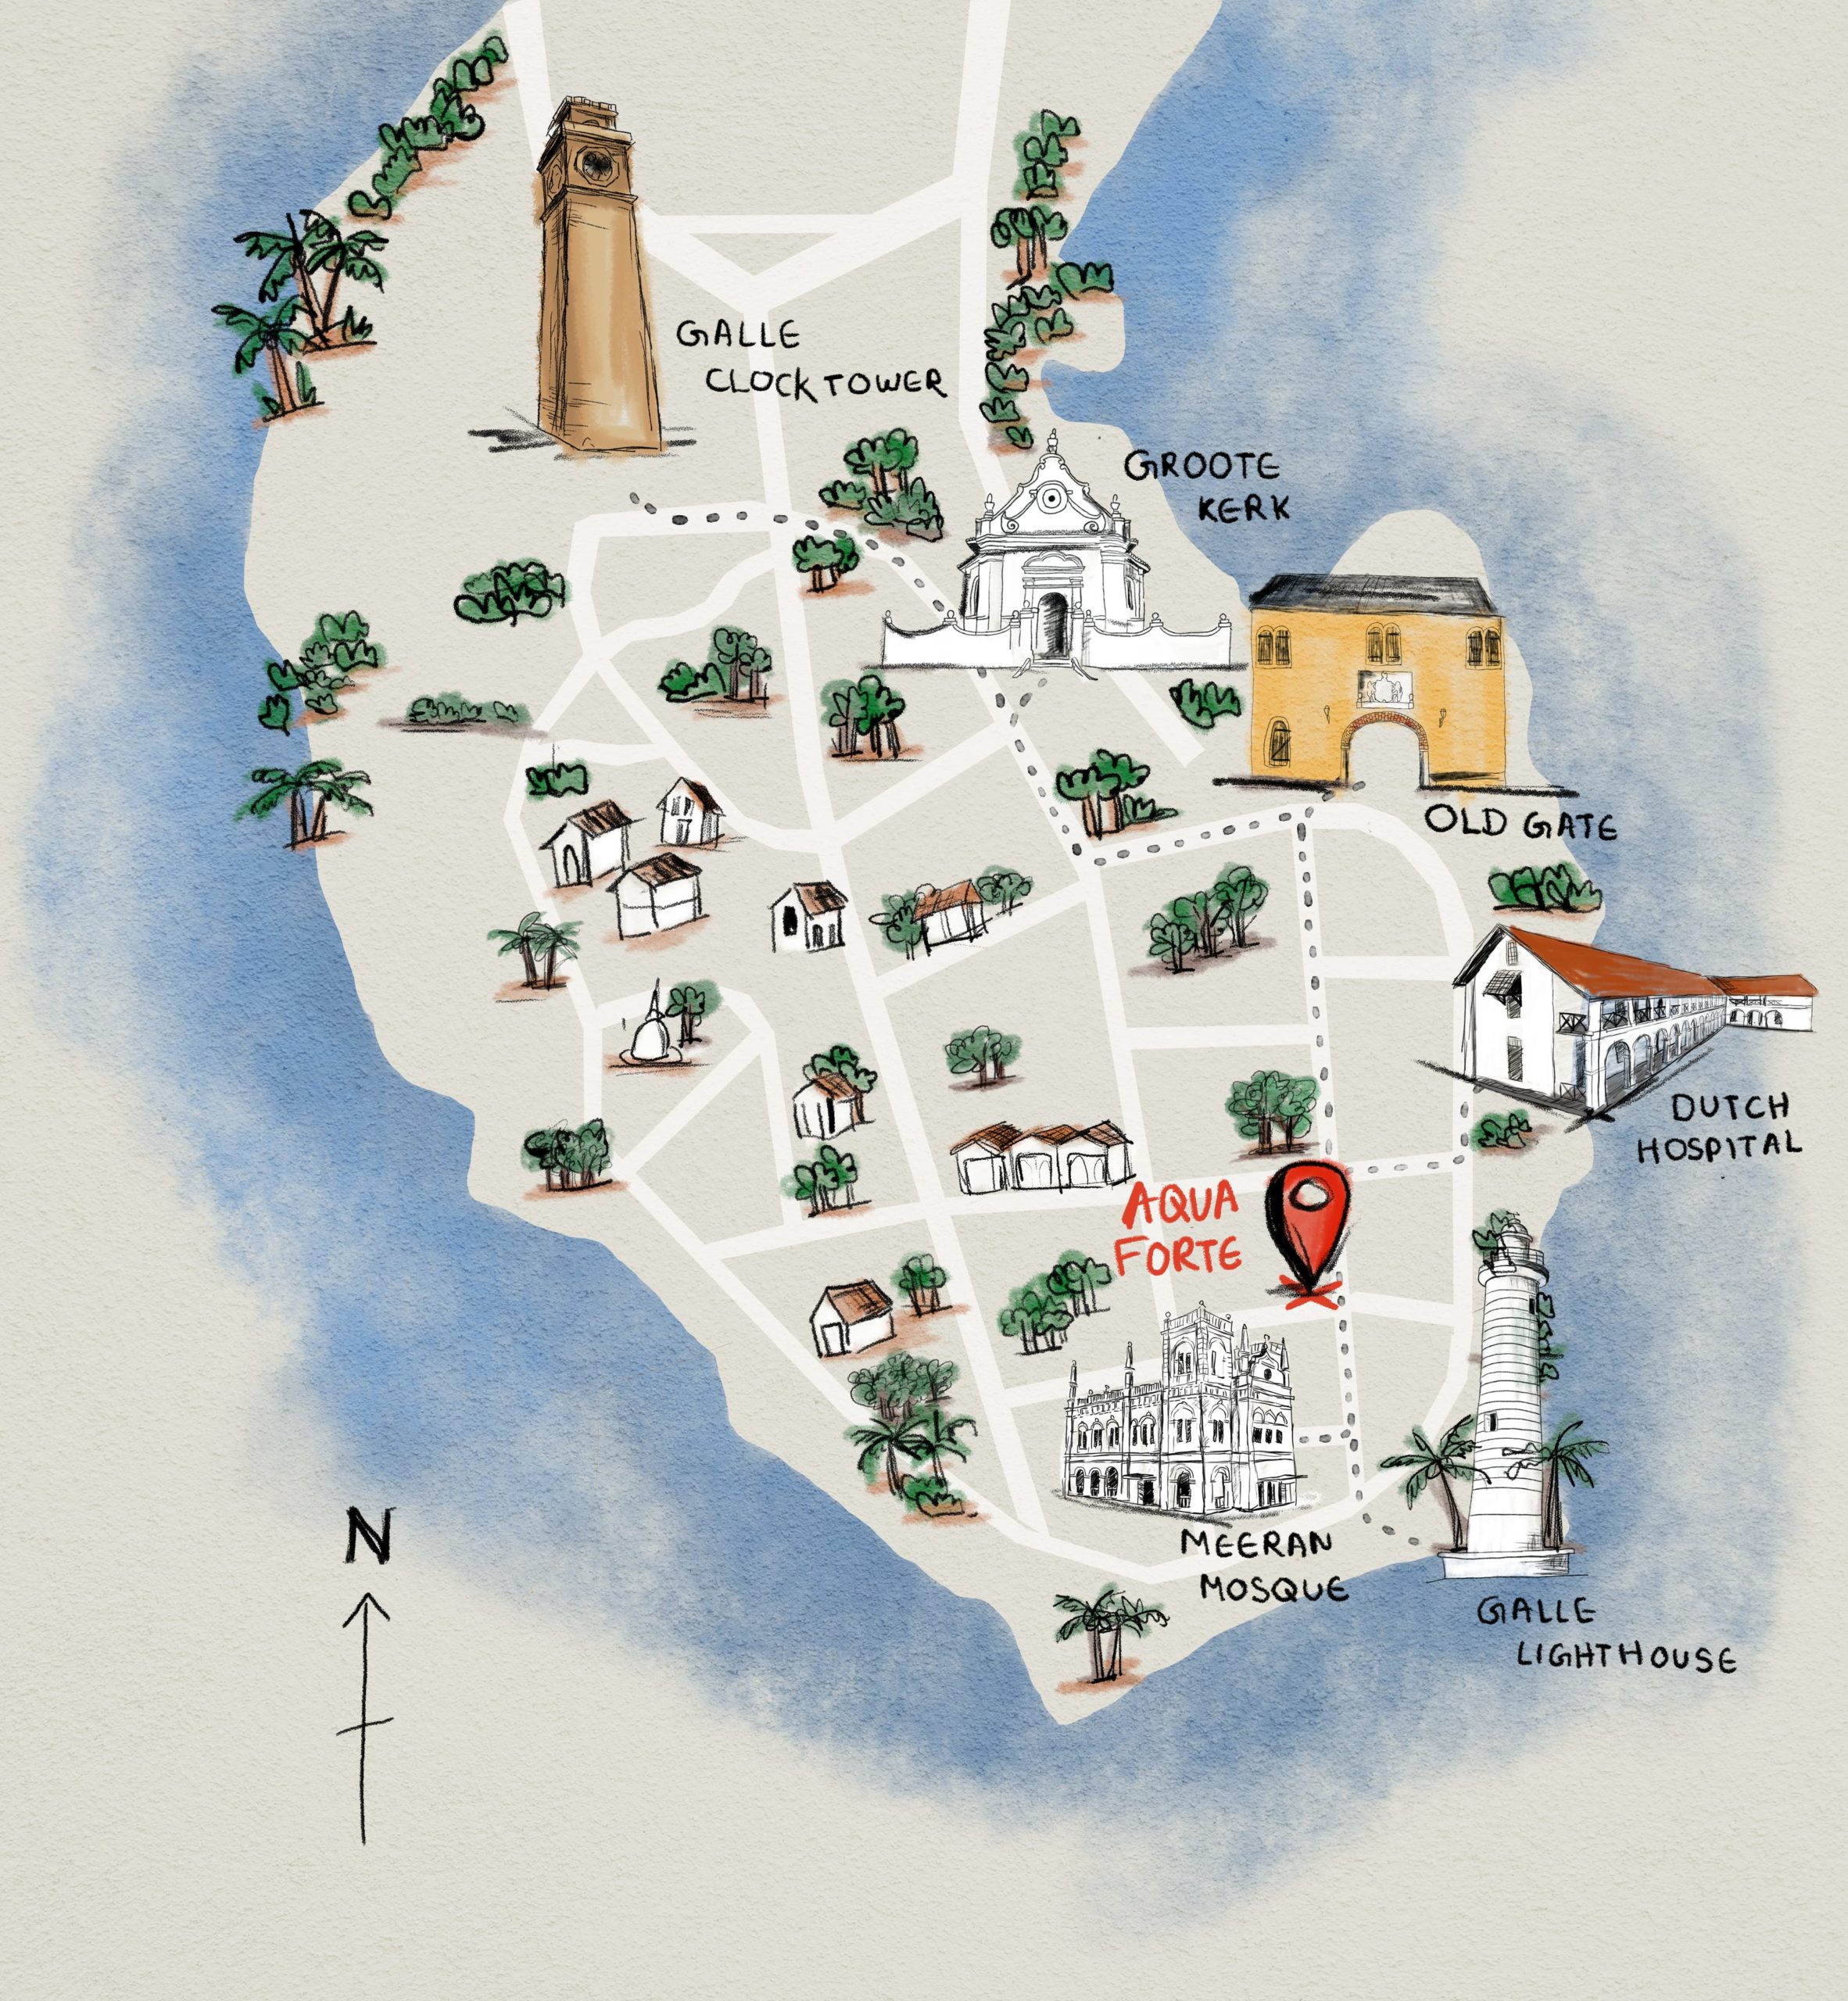 Map of Galle Fort